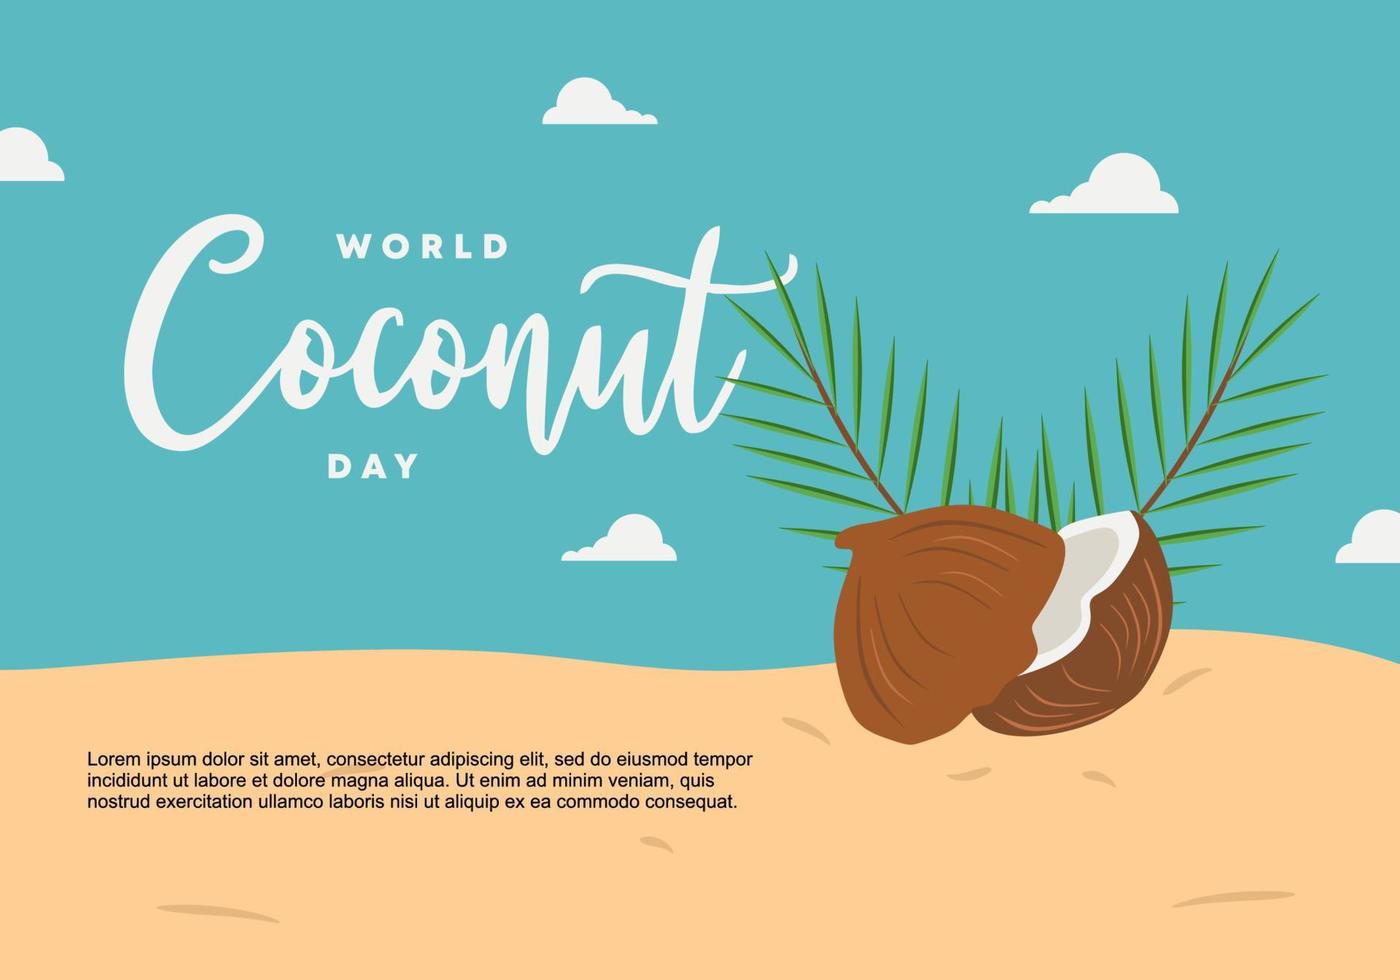 World coconut day with coconut on sand on september 2. vector